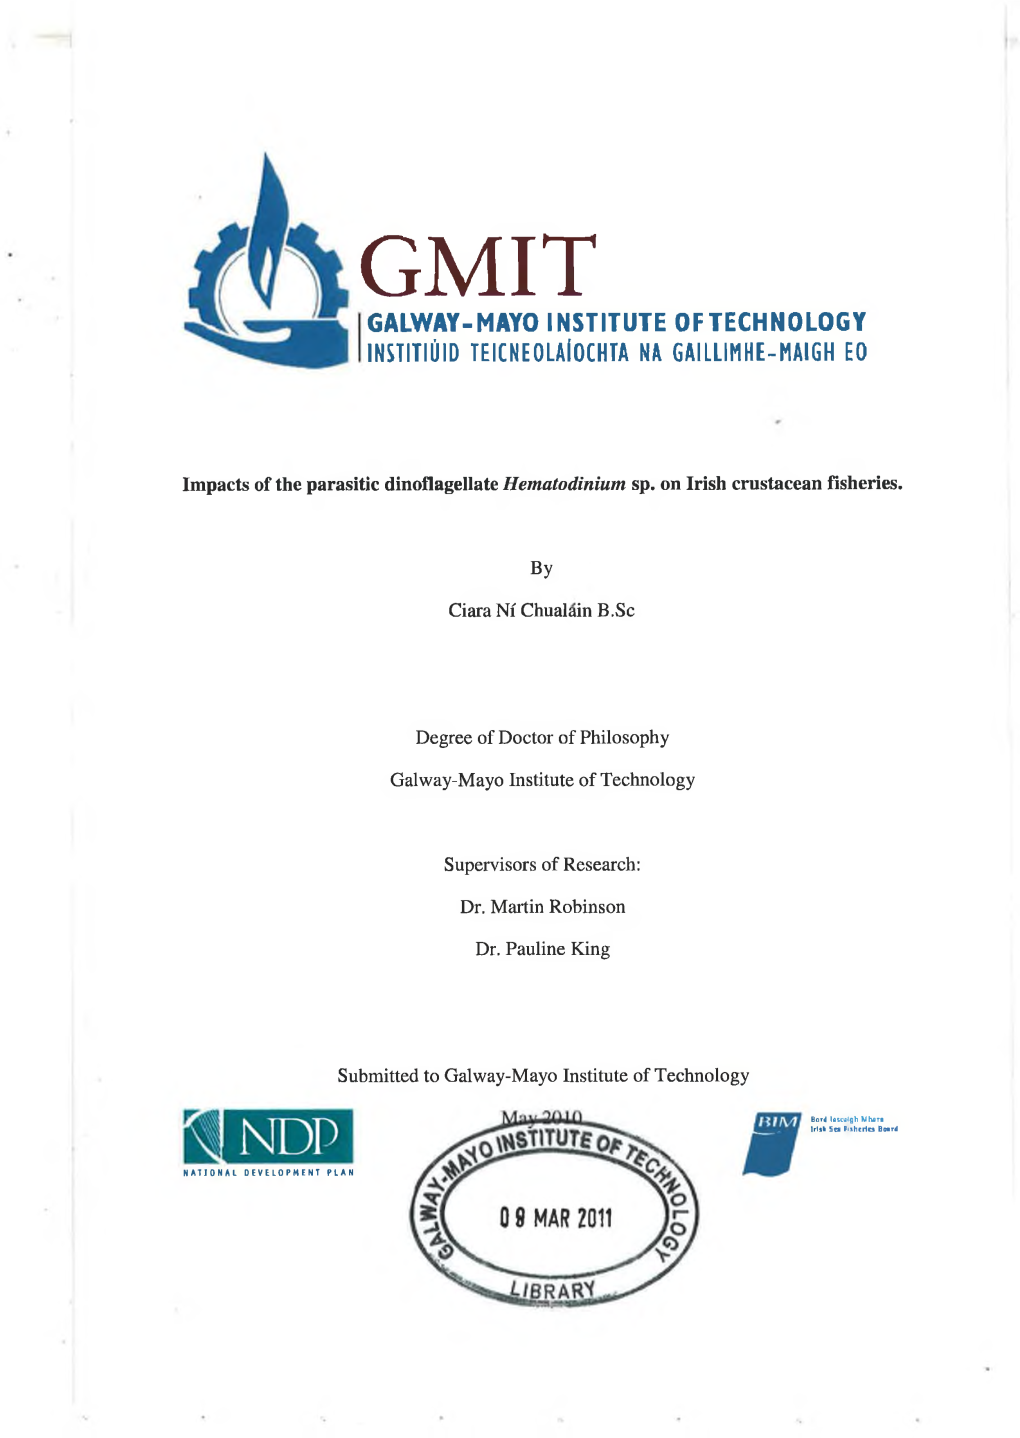 GMIT GALWAY-MAYO INSTITUTE OFTECHNOLOGY INSTITIÙID Teicneolalochta NA GAILLIMHE-HAIGH EO